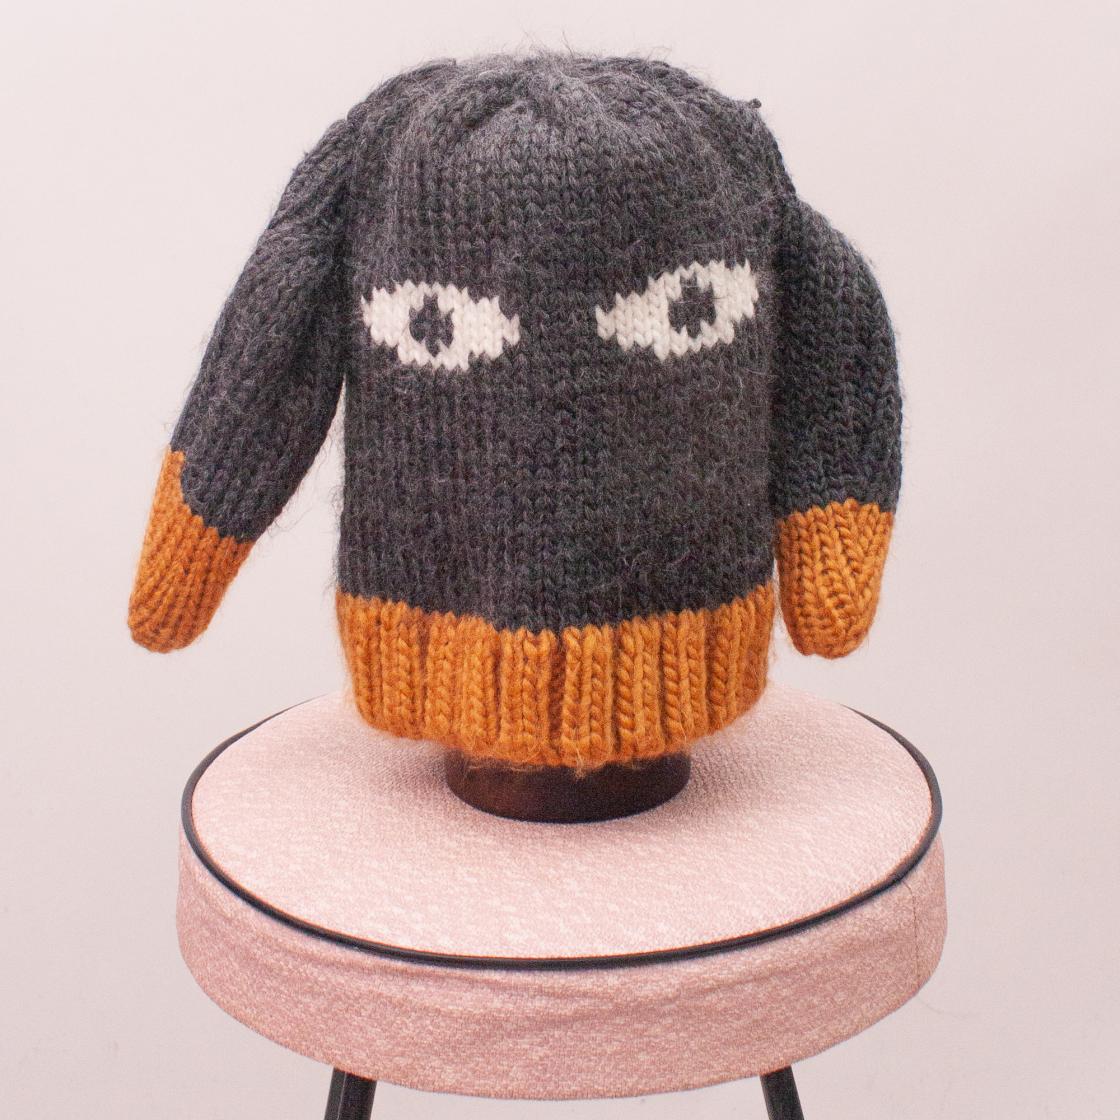 Cotton On Rabbit Beanie - Age 2-4 Approx.